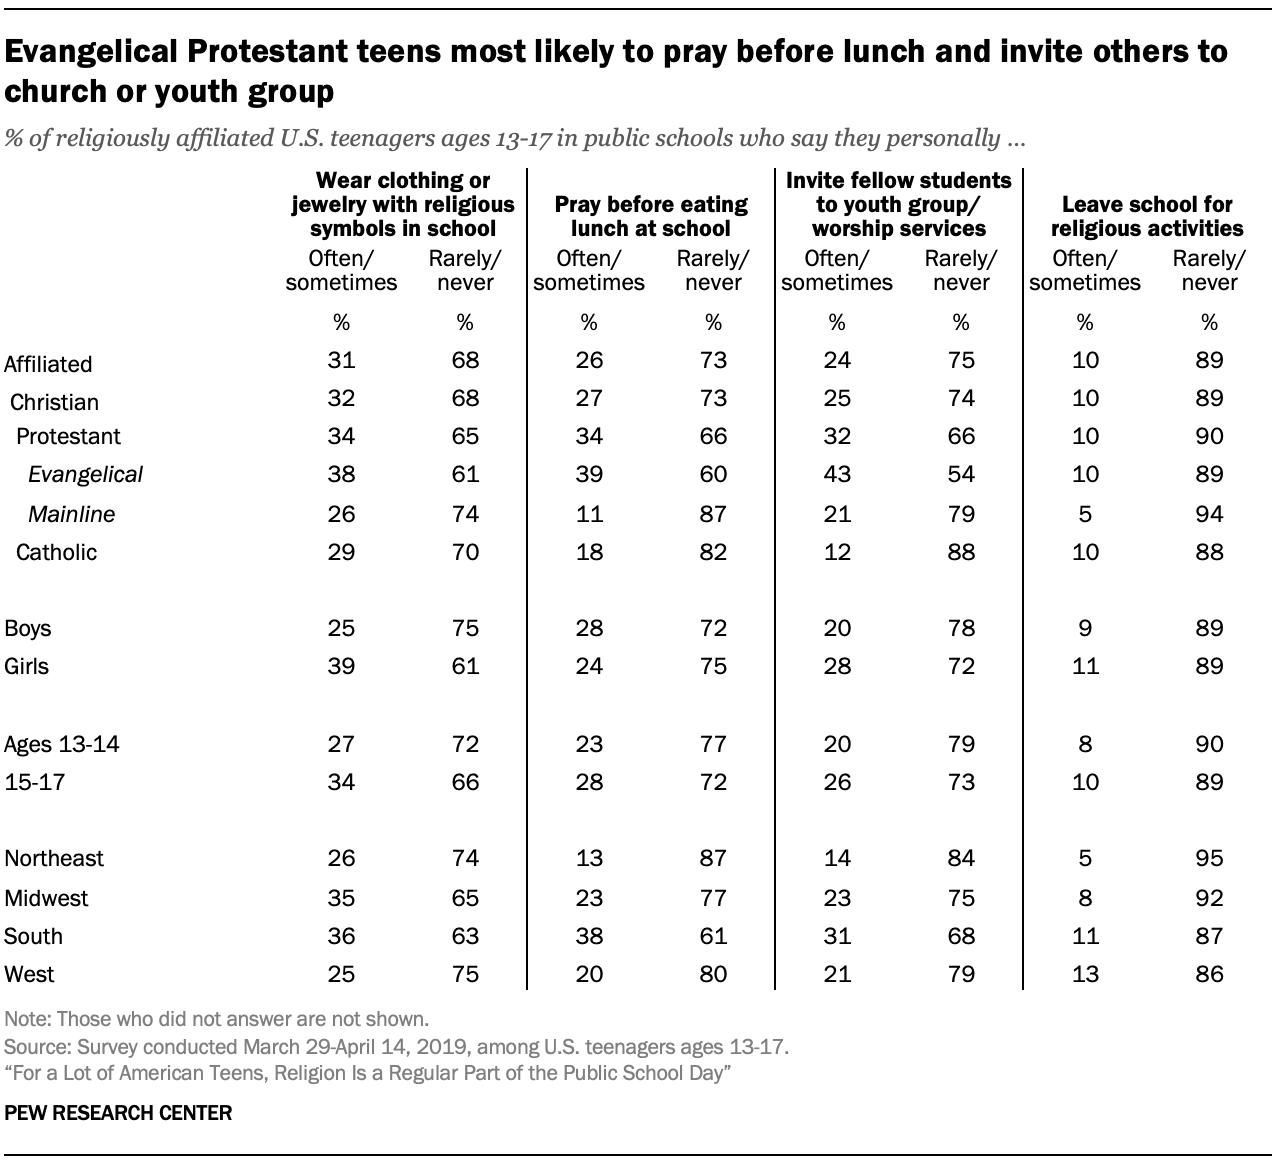 Evangelical Protestant teens most likely to pray before lunch and invite others to church or youth group